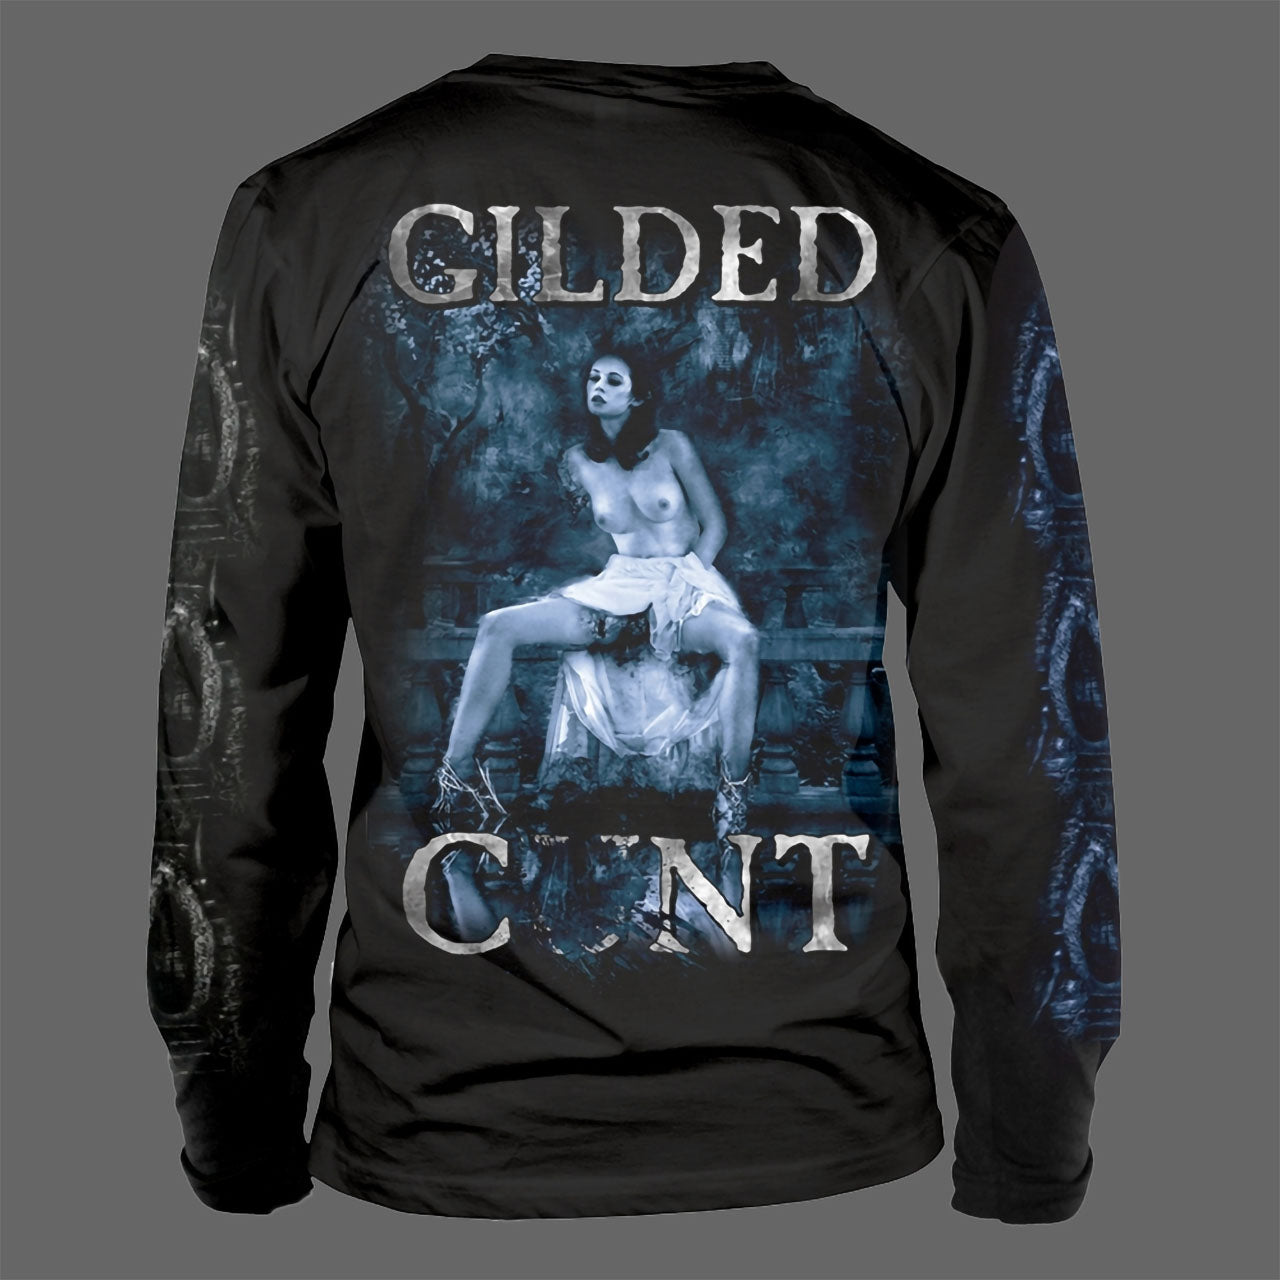 Cradle of Filth - Gilded (Long Sleeve T-Shirt)